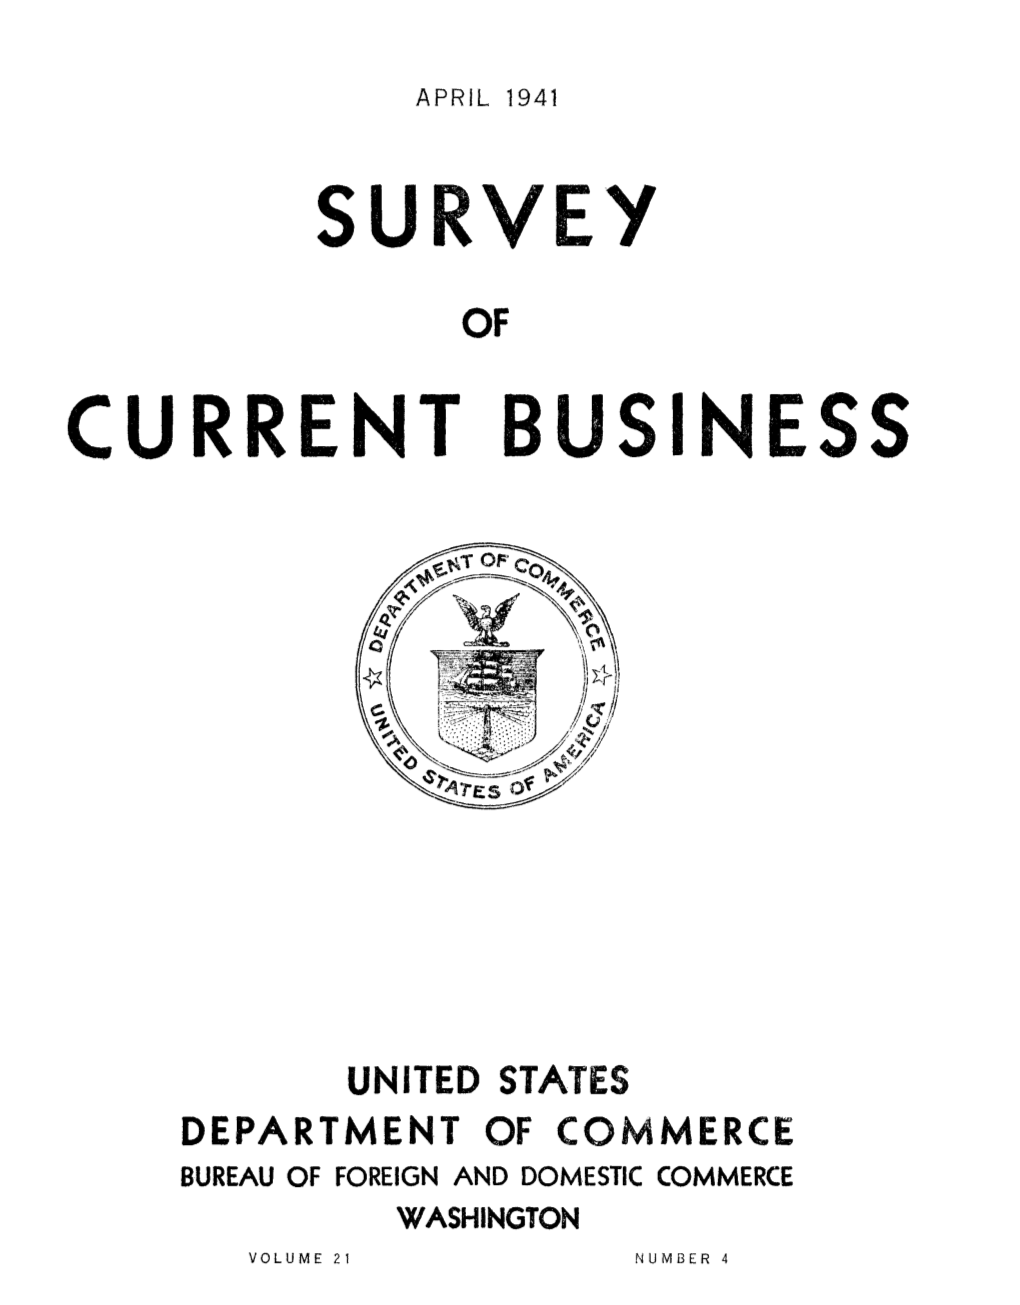 SURVEY of CURRENT BUSINESS April 1941 And, in December, Orders for 1,840,000 Pairs, Based on Tent